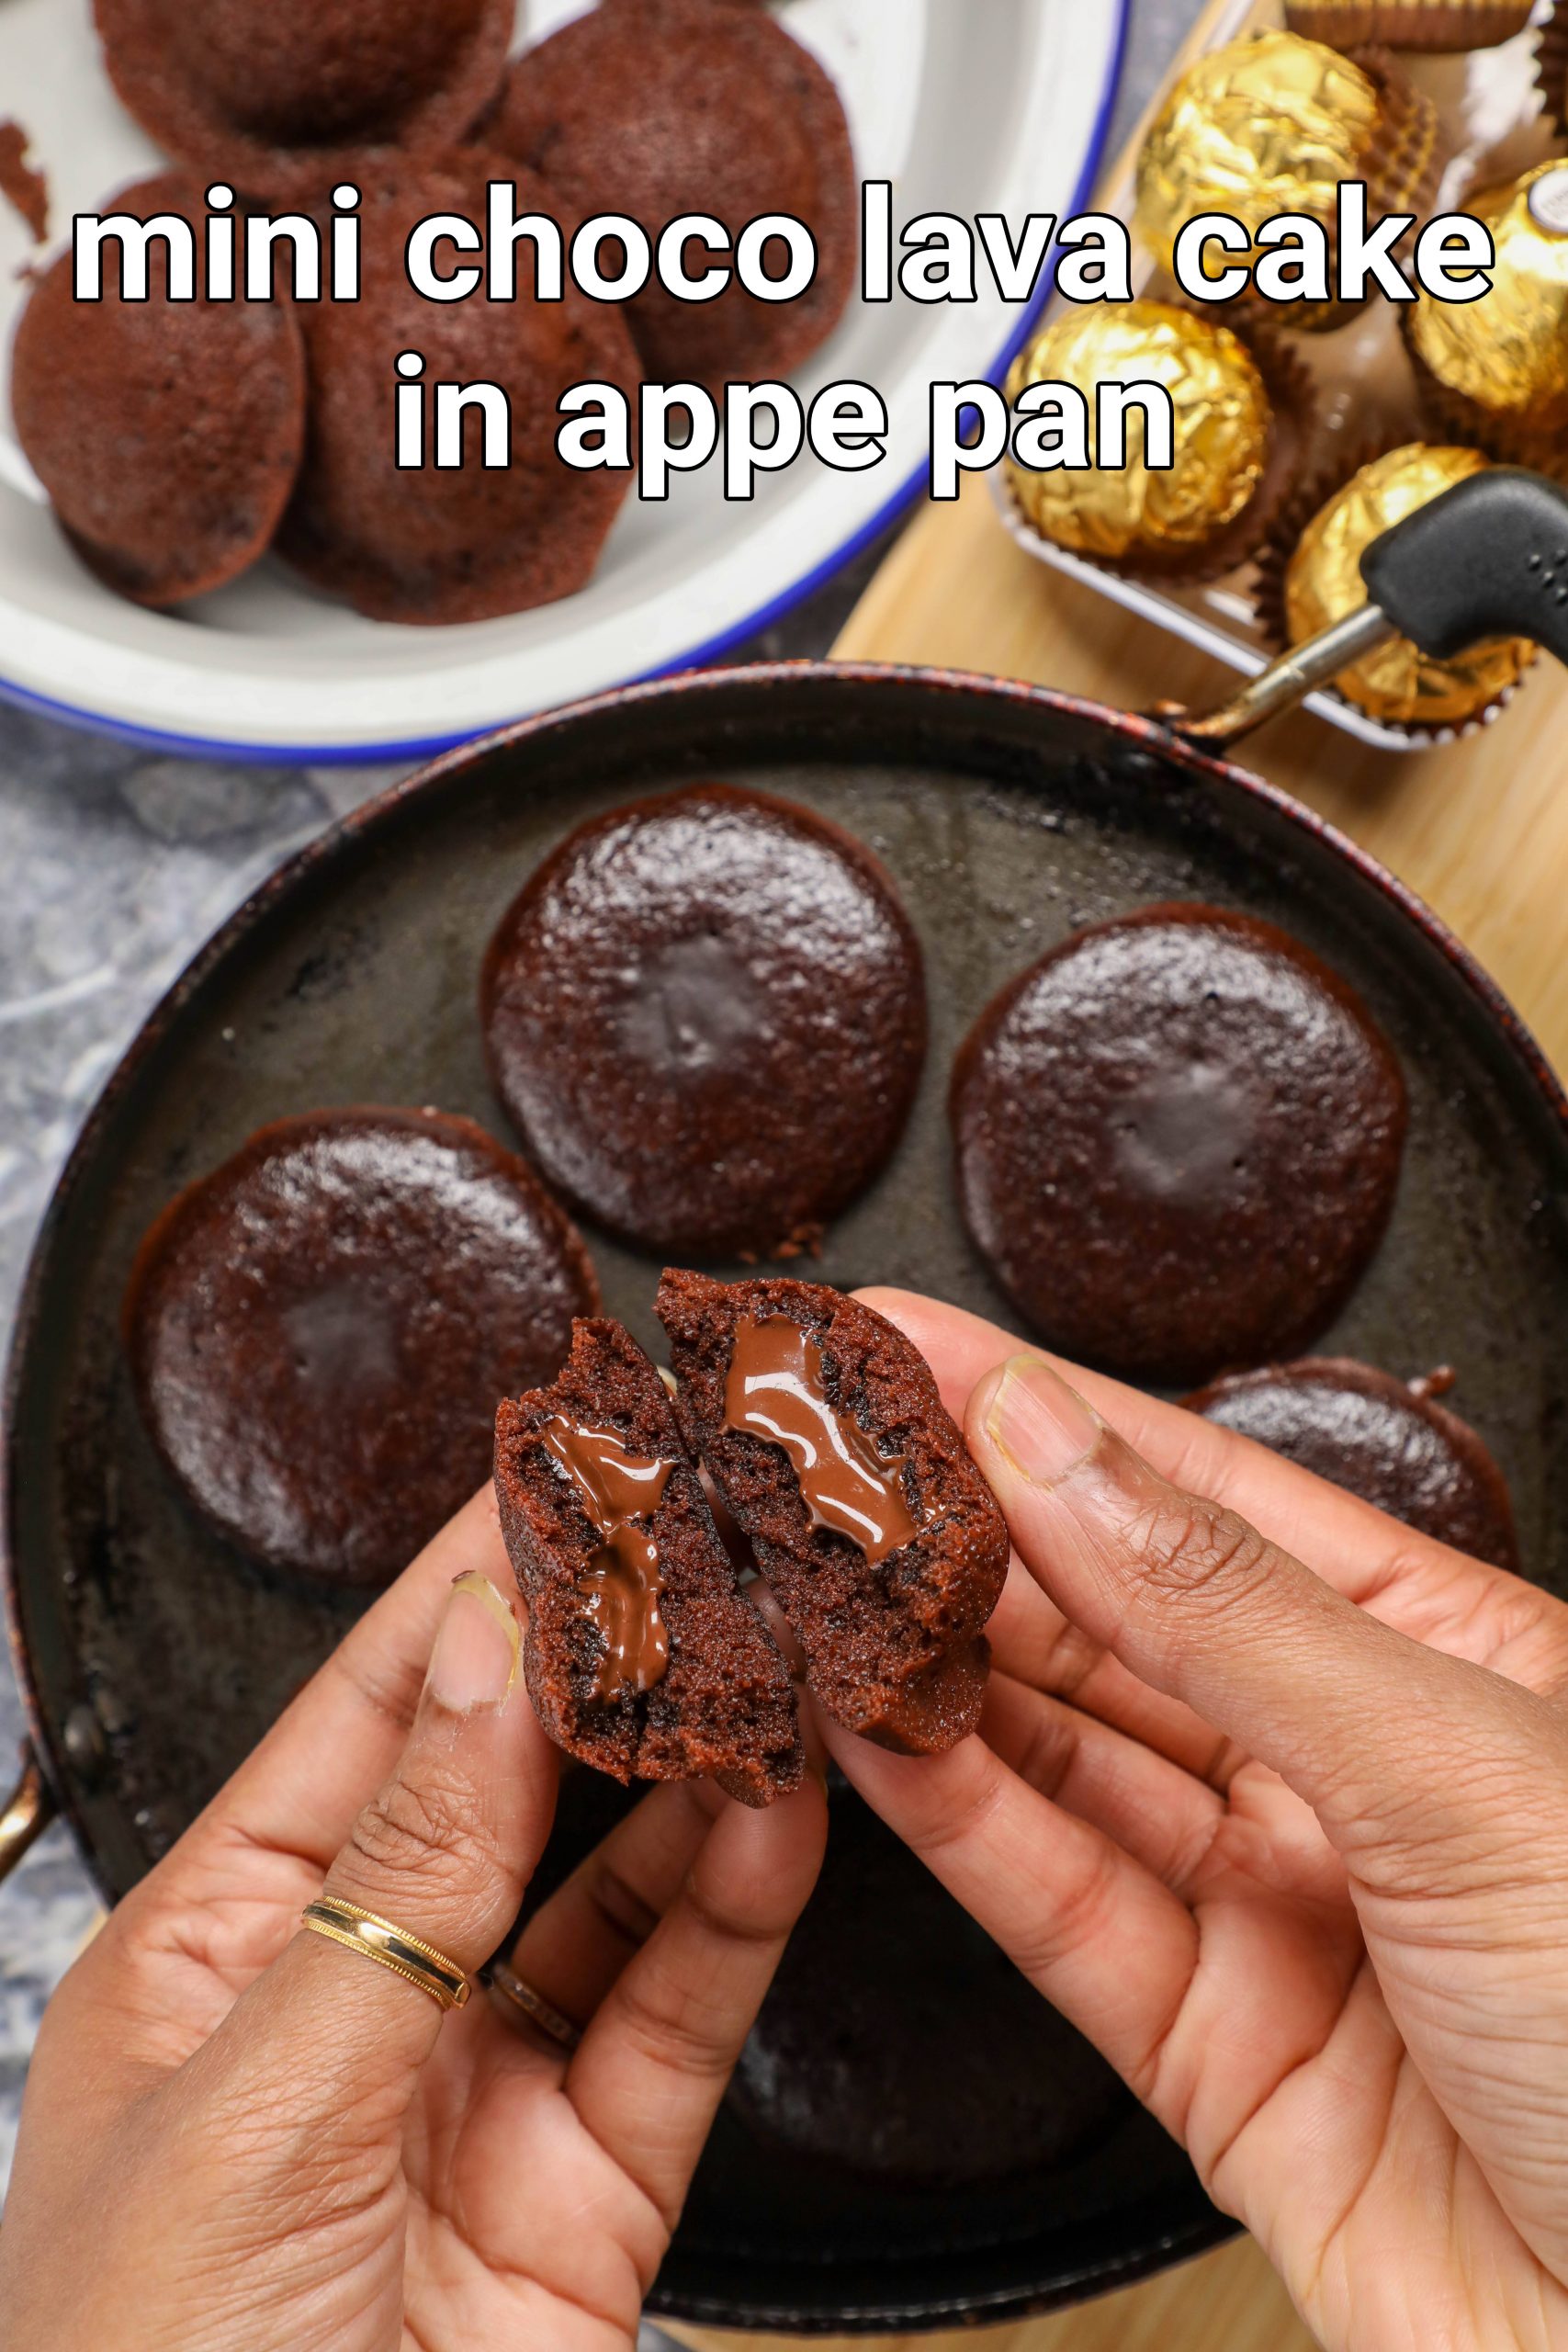 Lava Chocolate Cakes Recipe: How to Make It